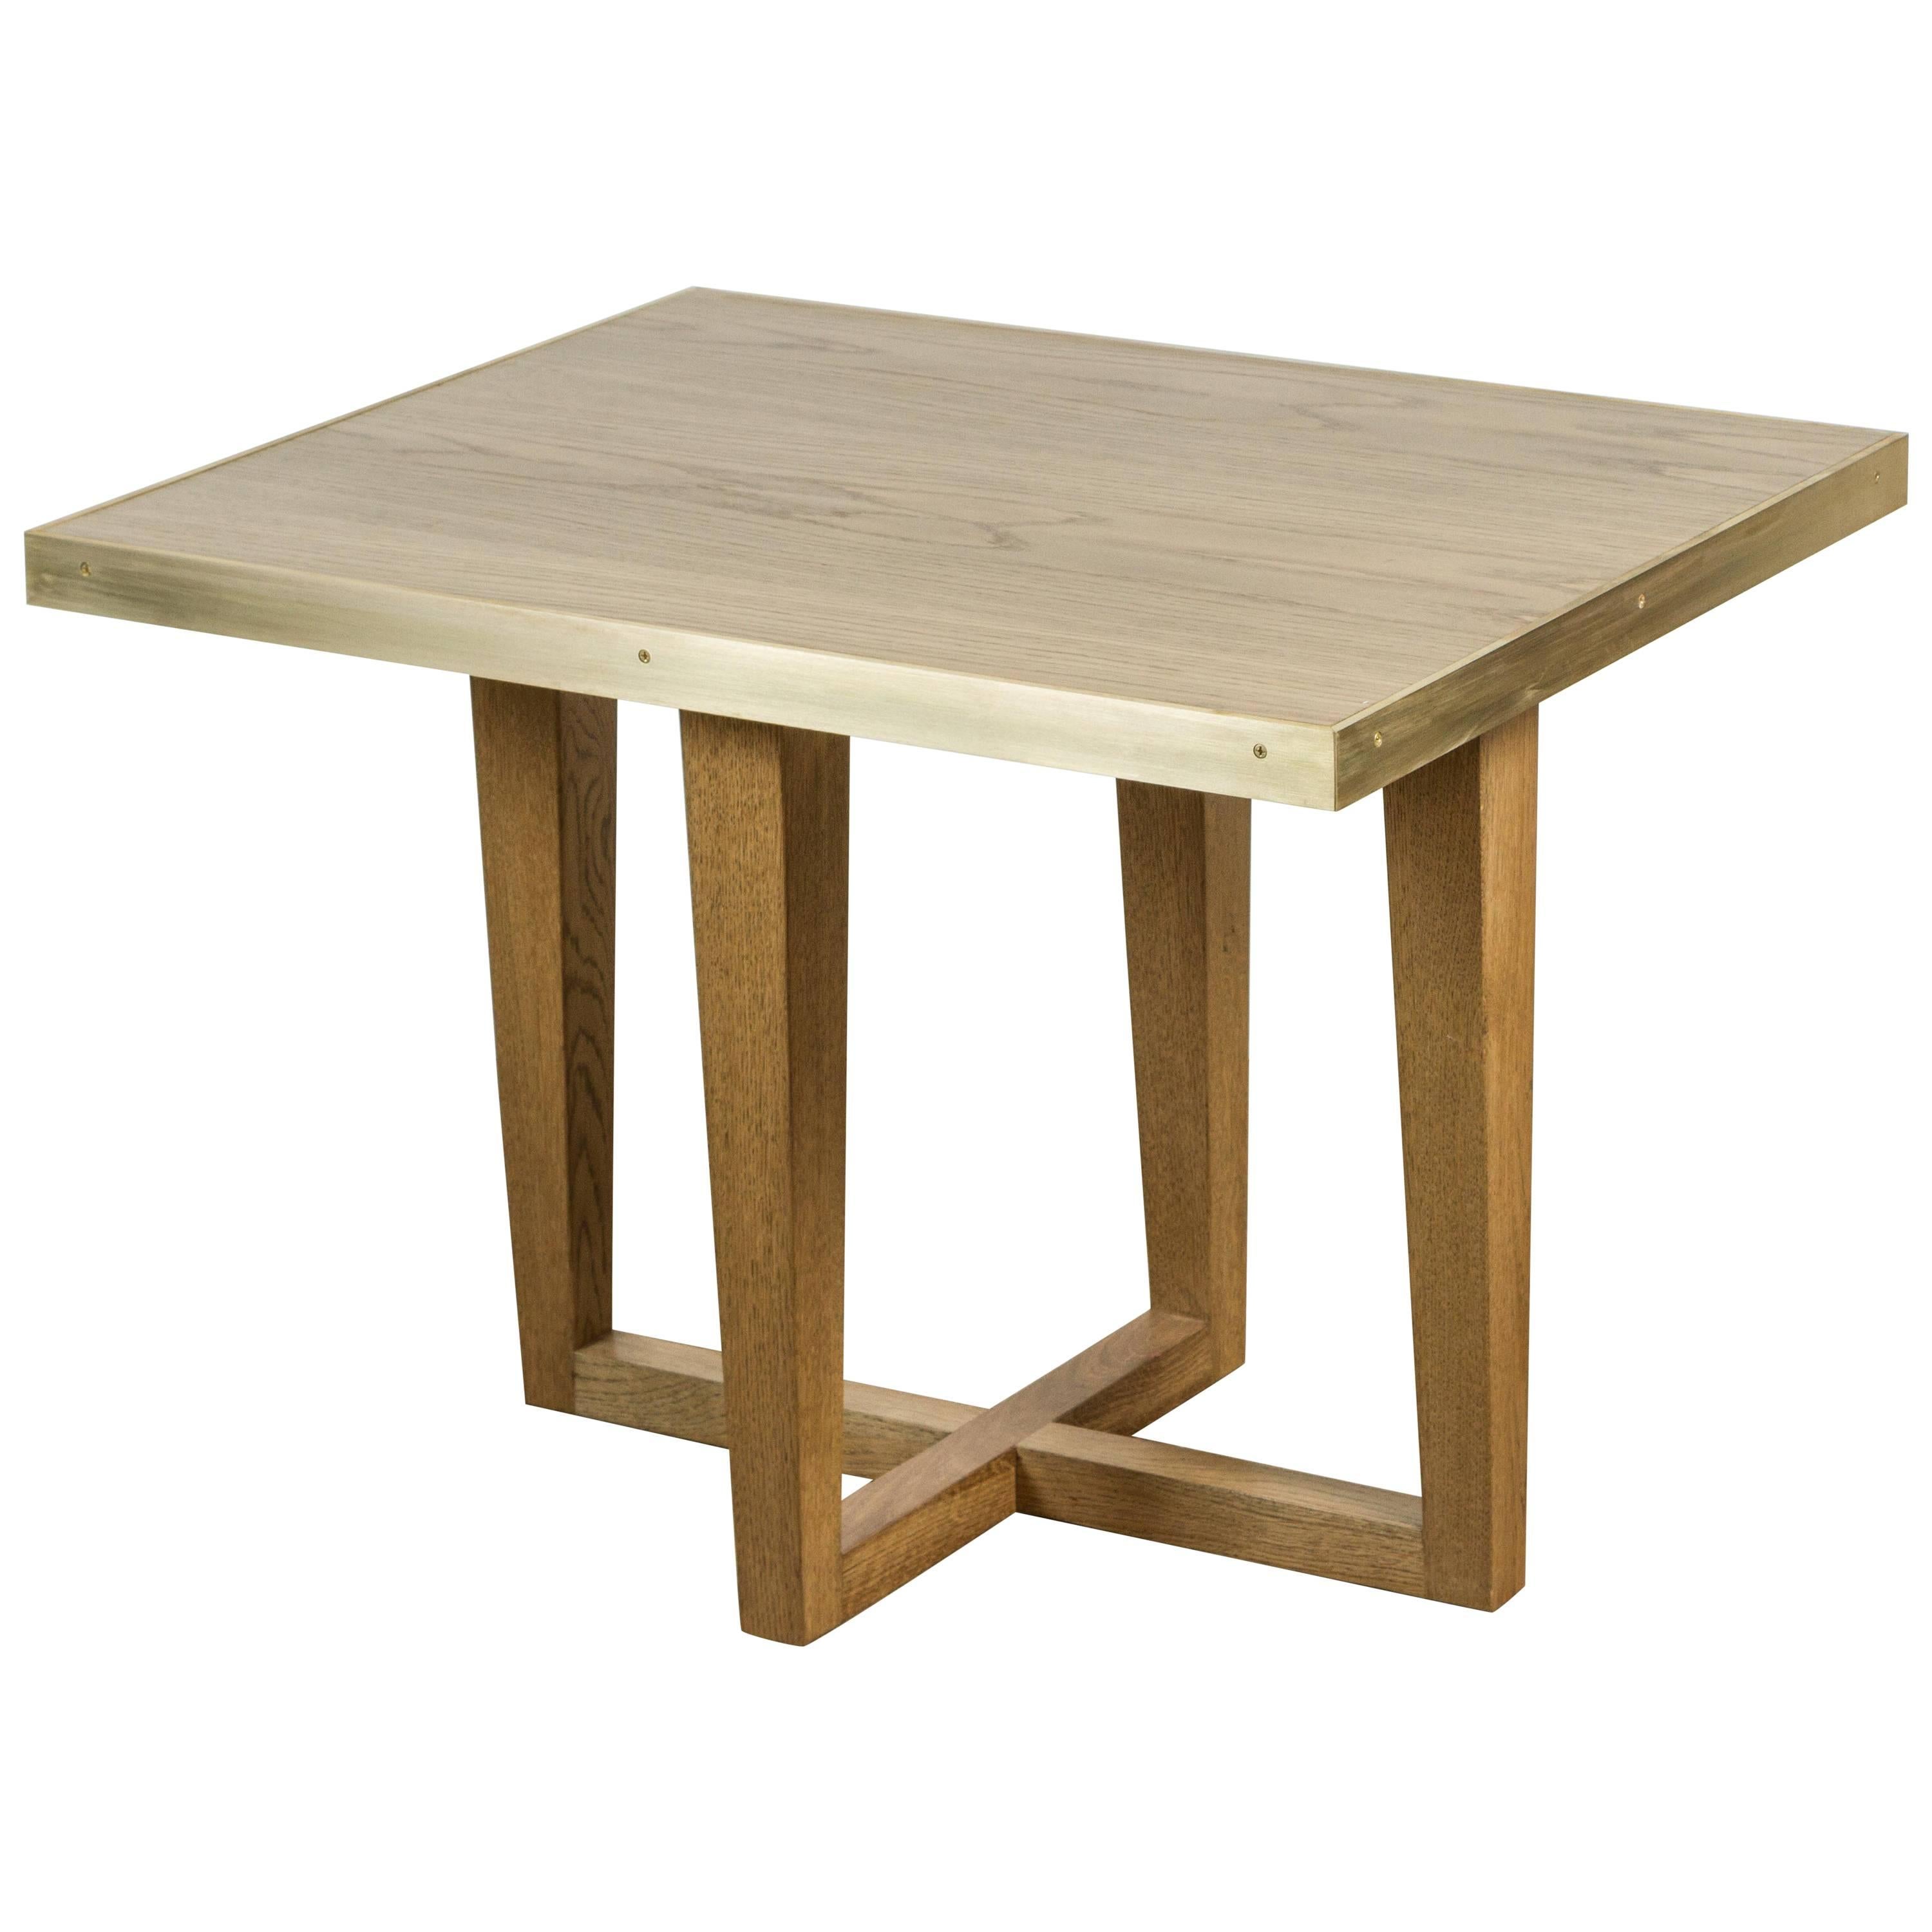 Rialto Table - Wide by Lawson-Fenning For Sale